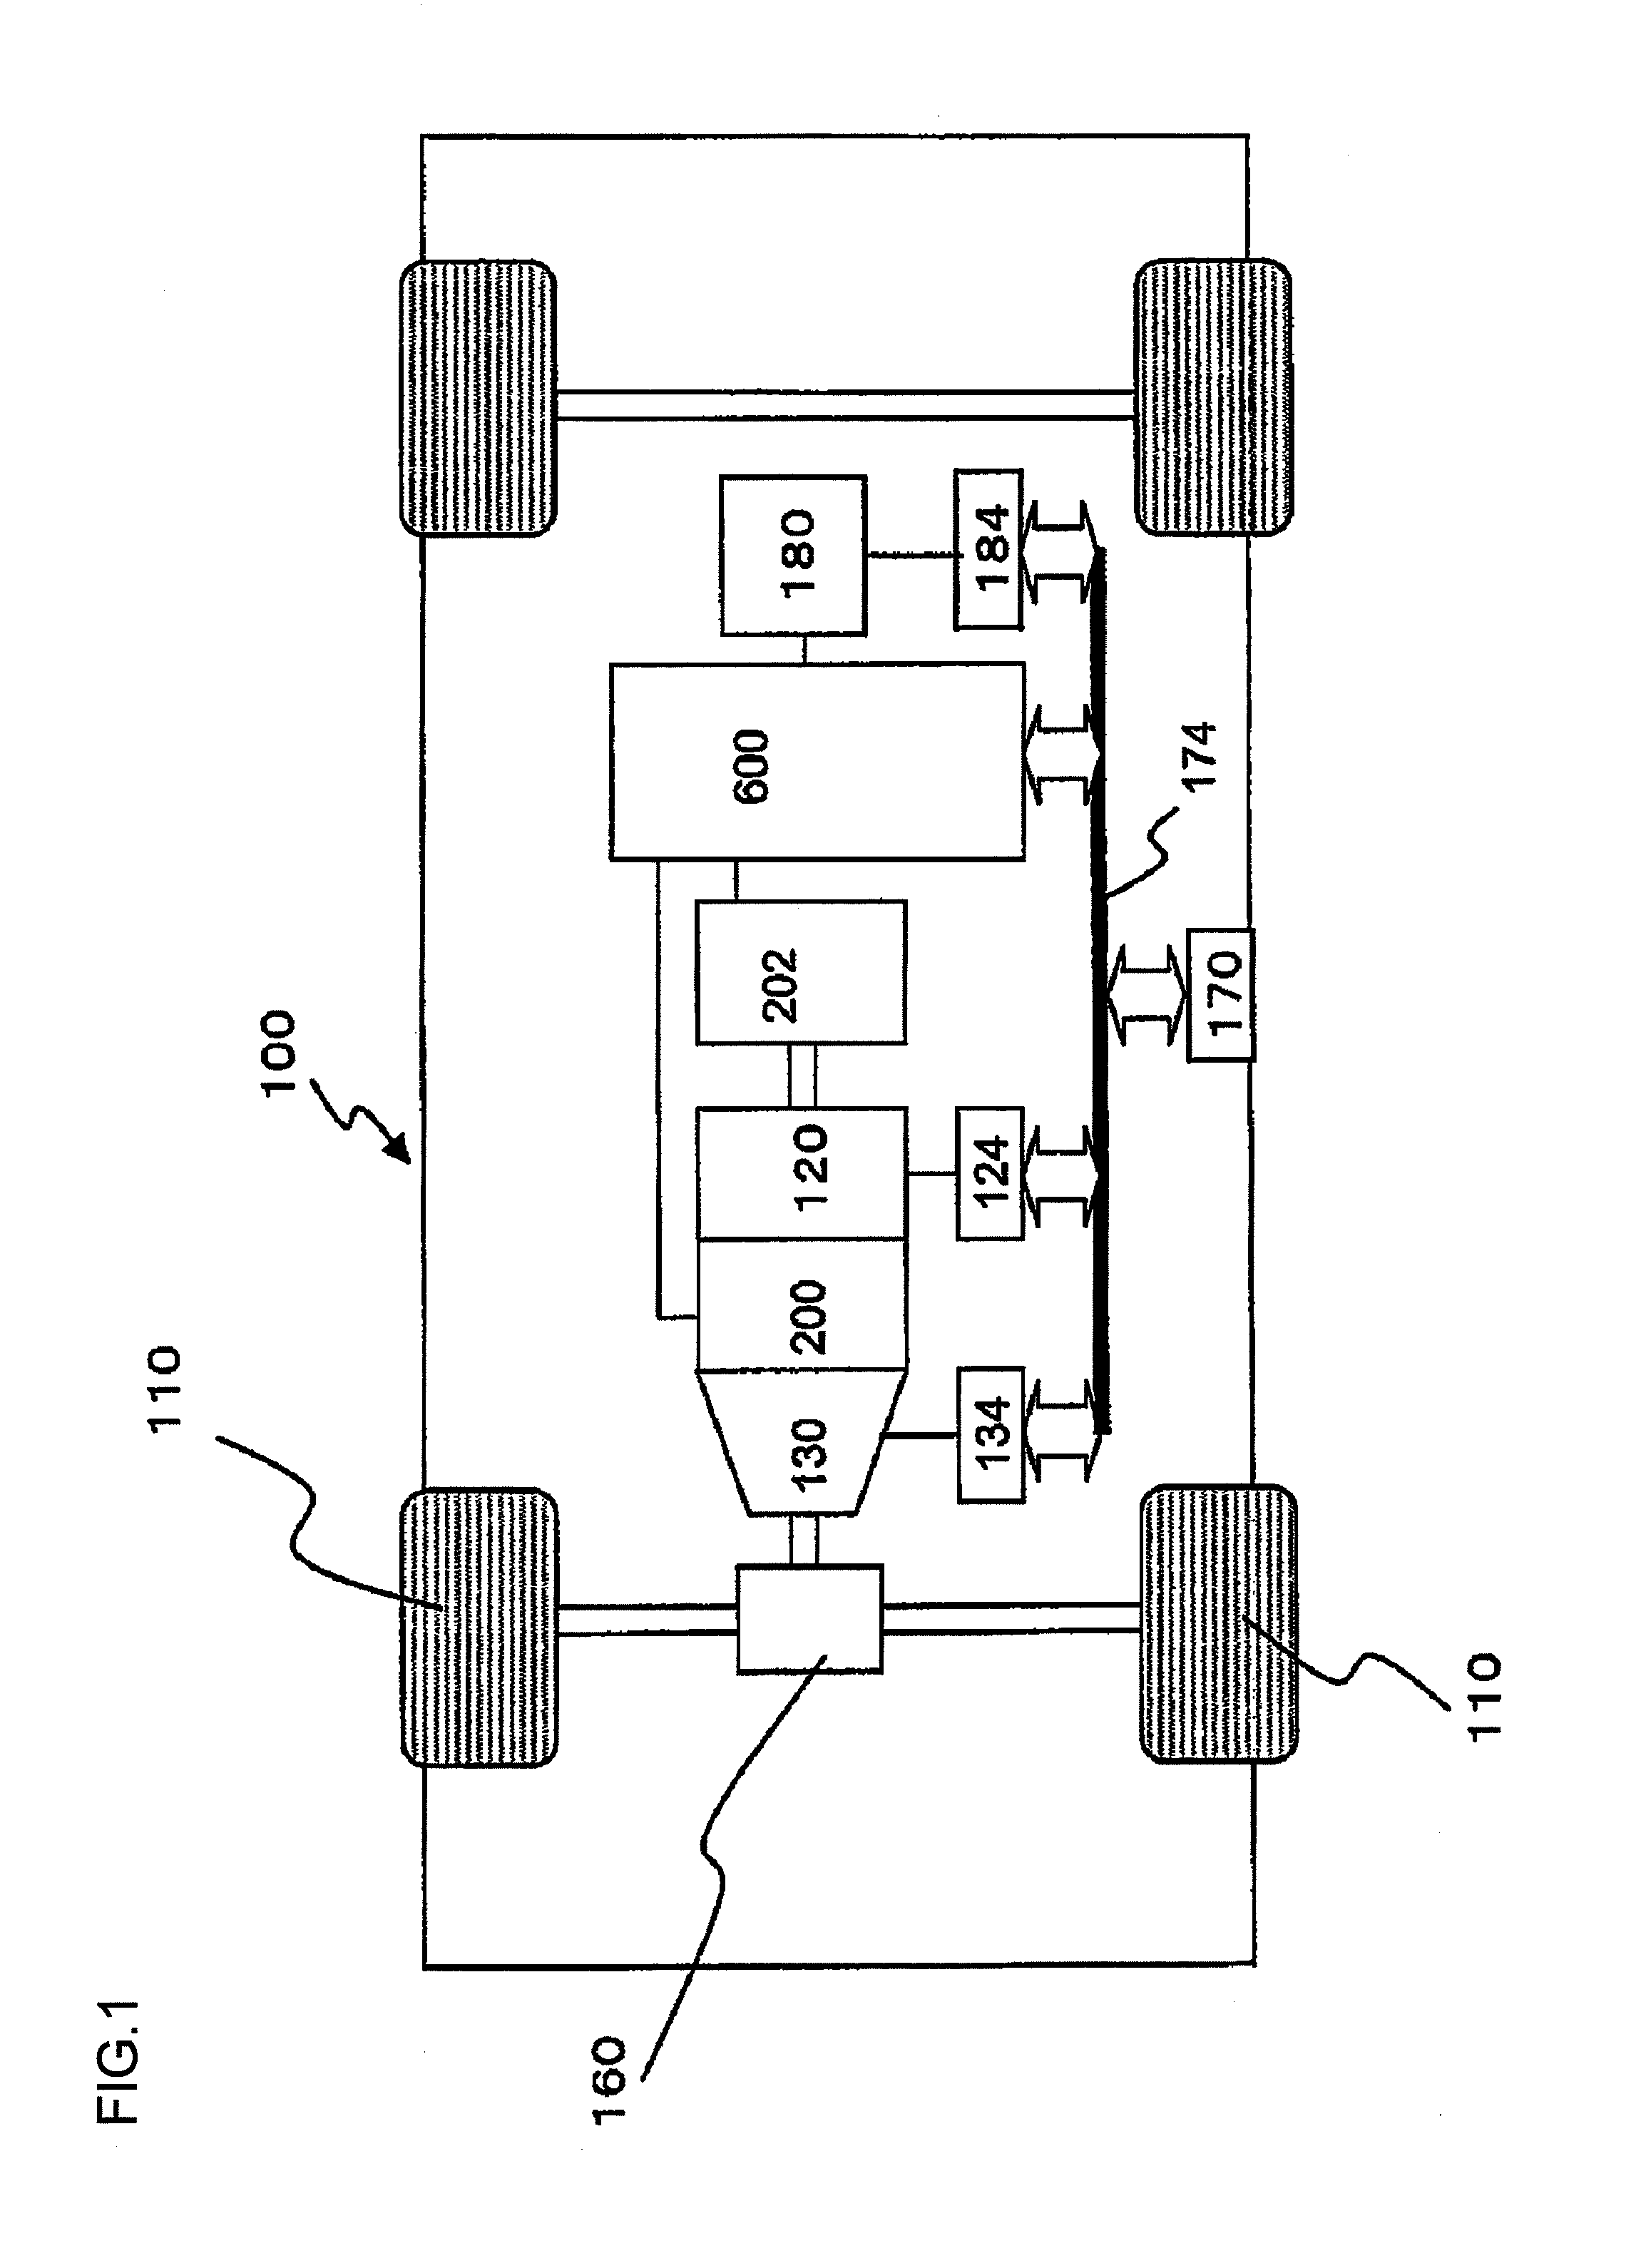 Rotor and rotating electric machine equipped with the rotor